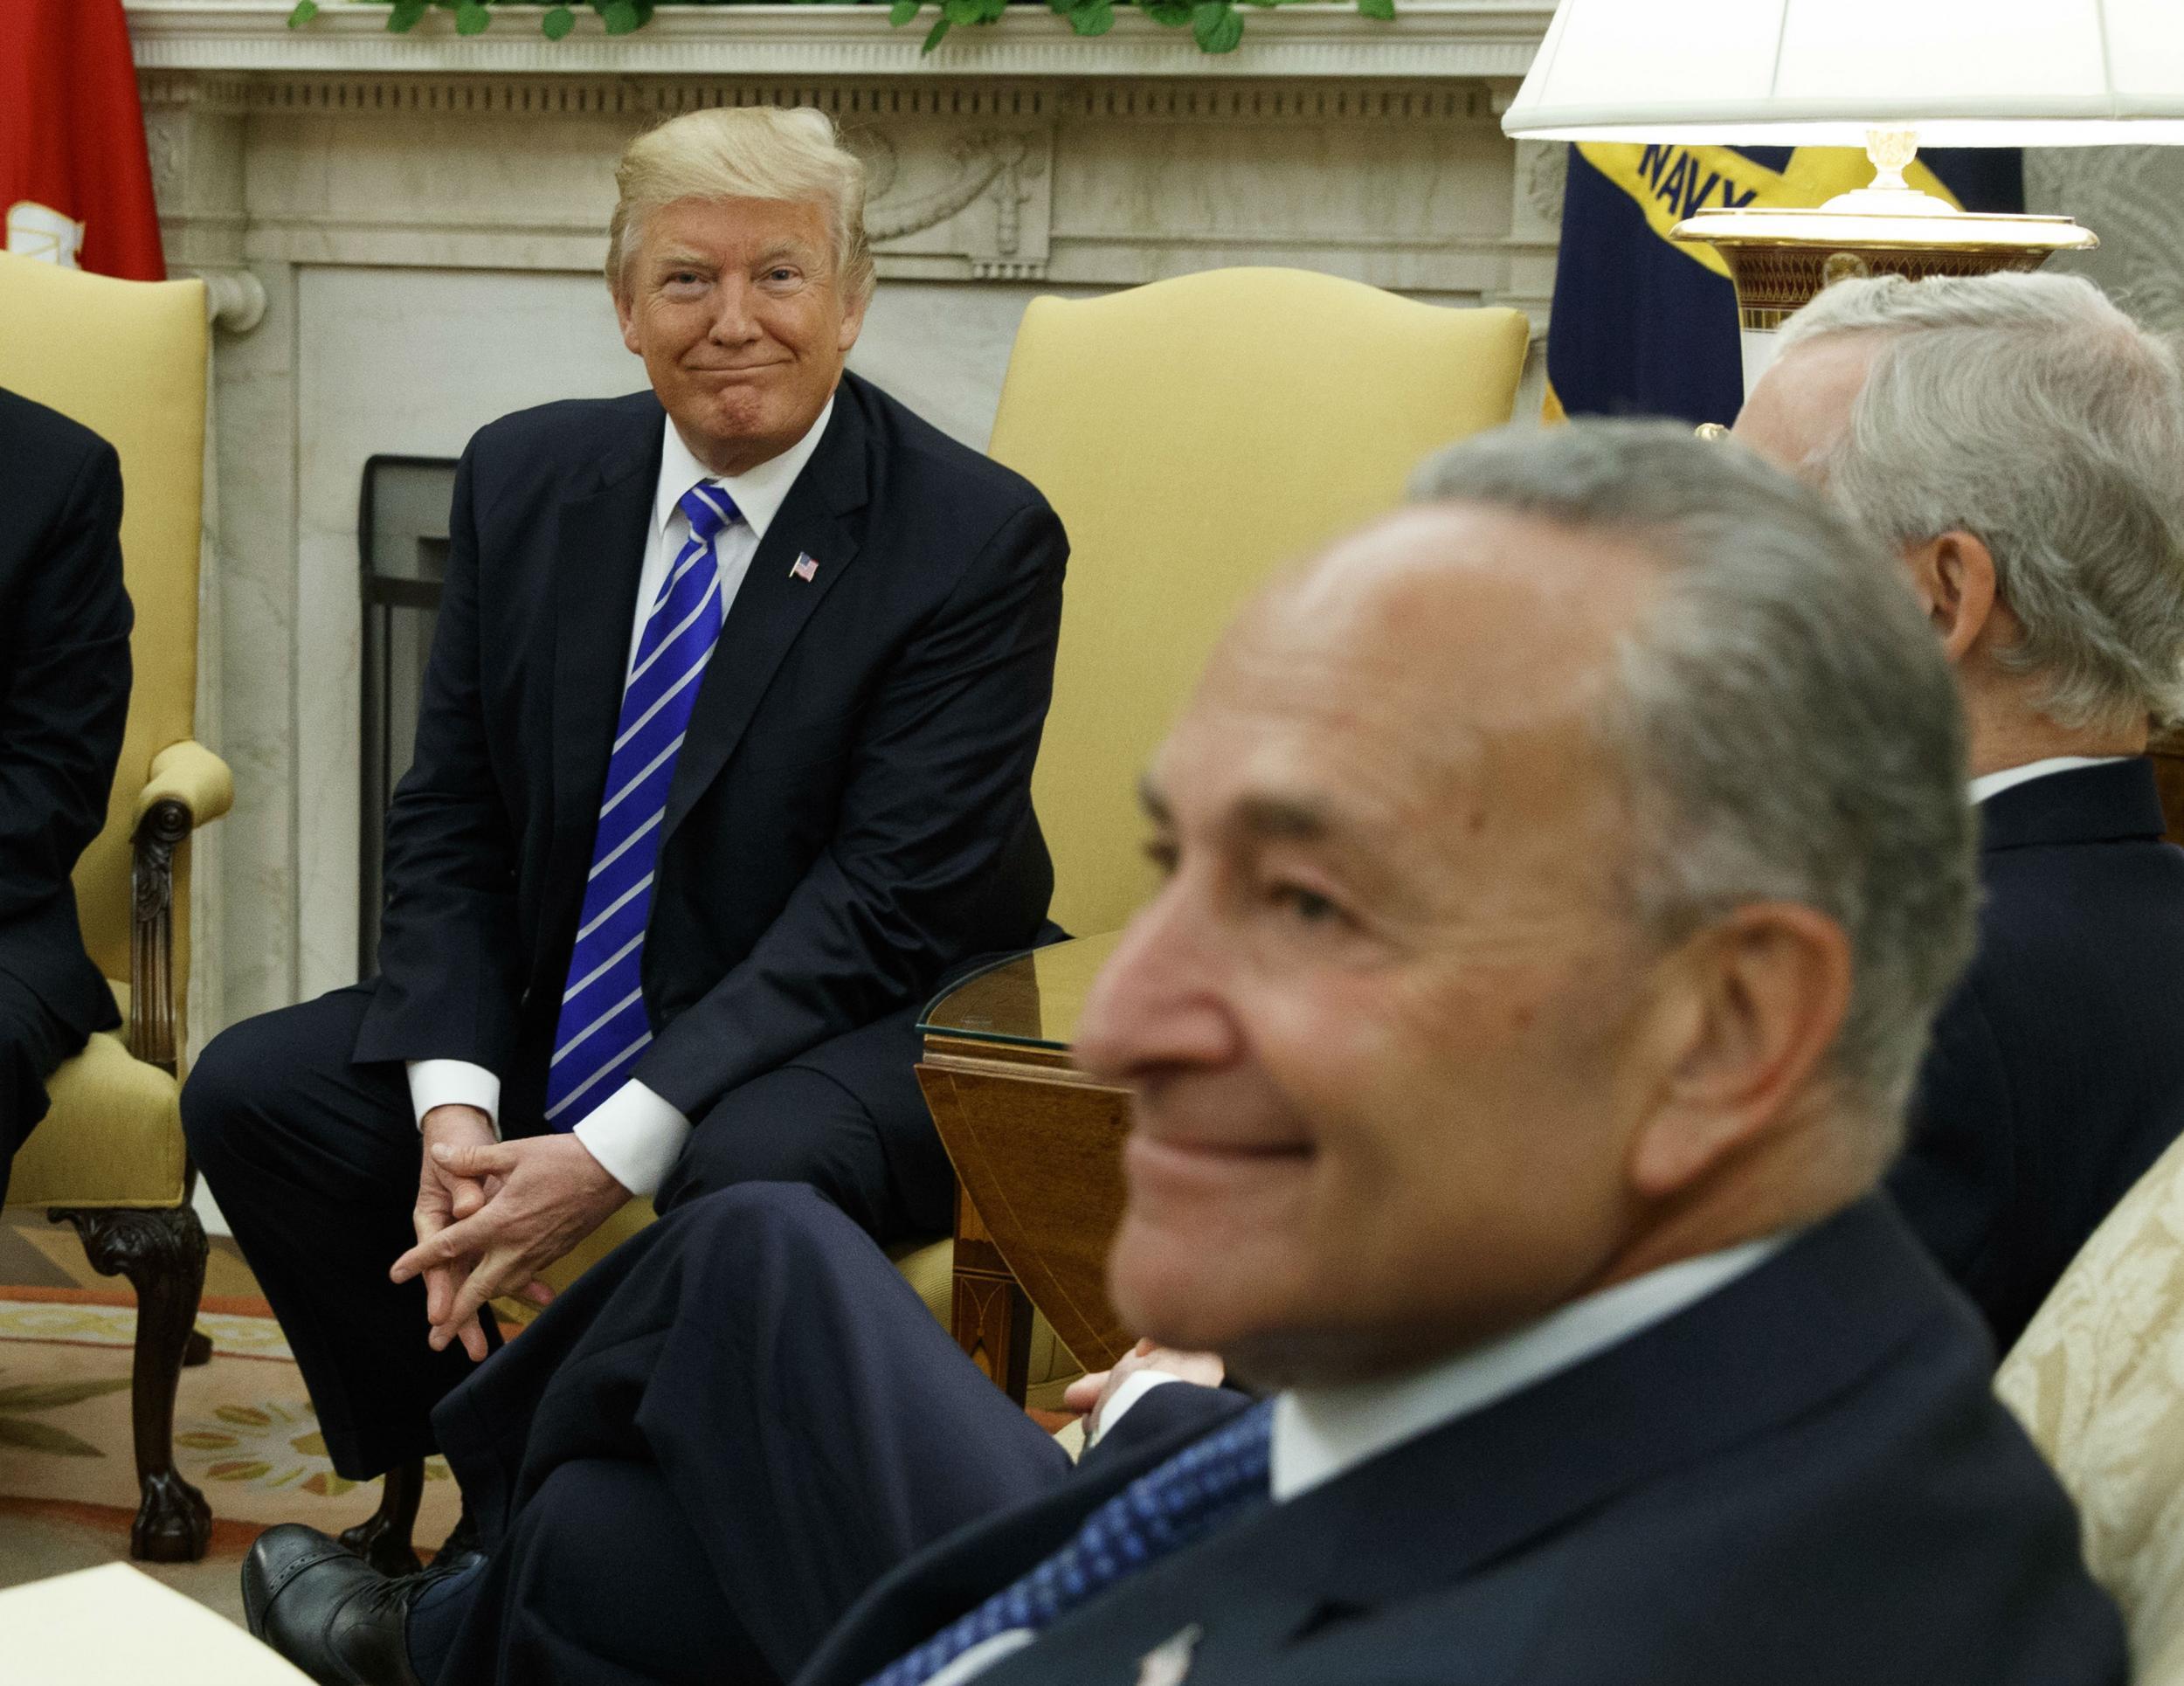 Senator Chuck Schumer beams during the Oval Office meeting where he and Nancy Pelosi struck a budget deal with President Trump